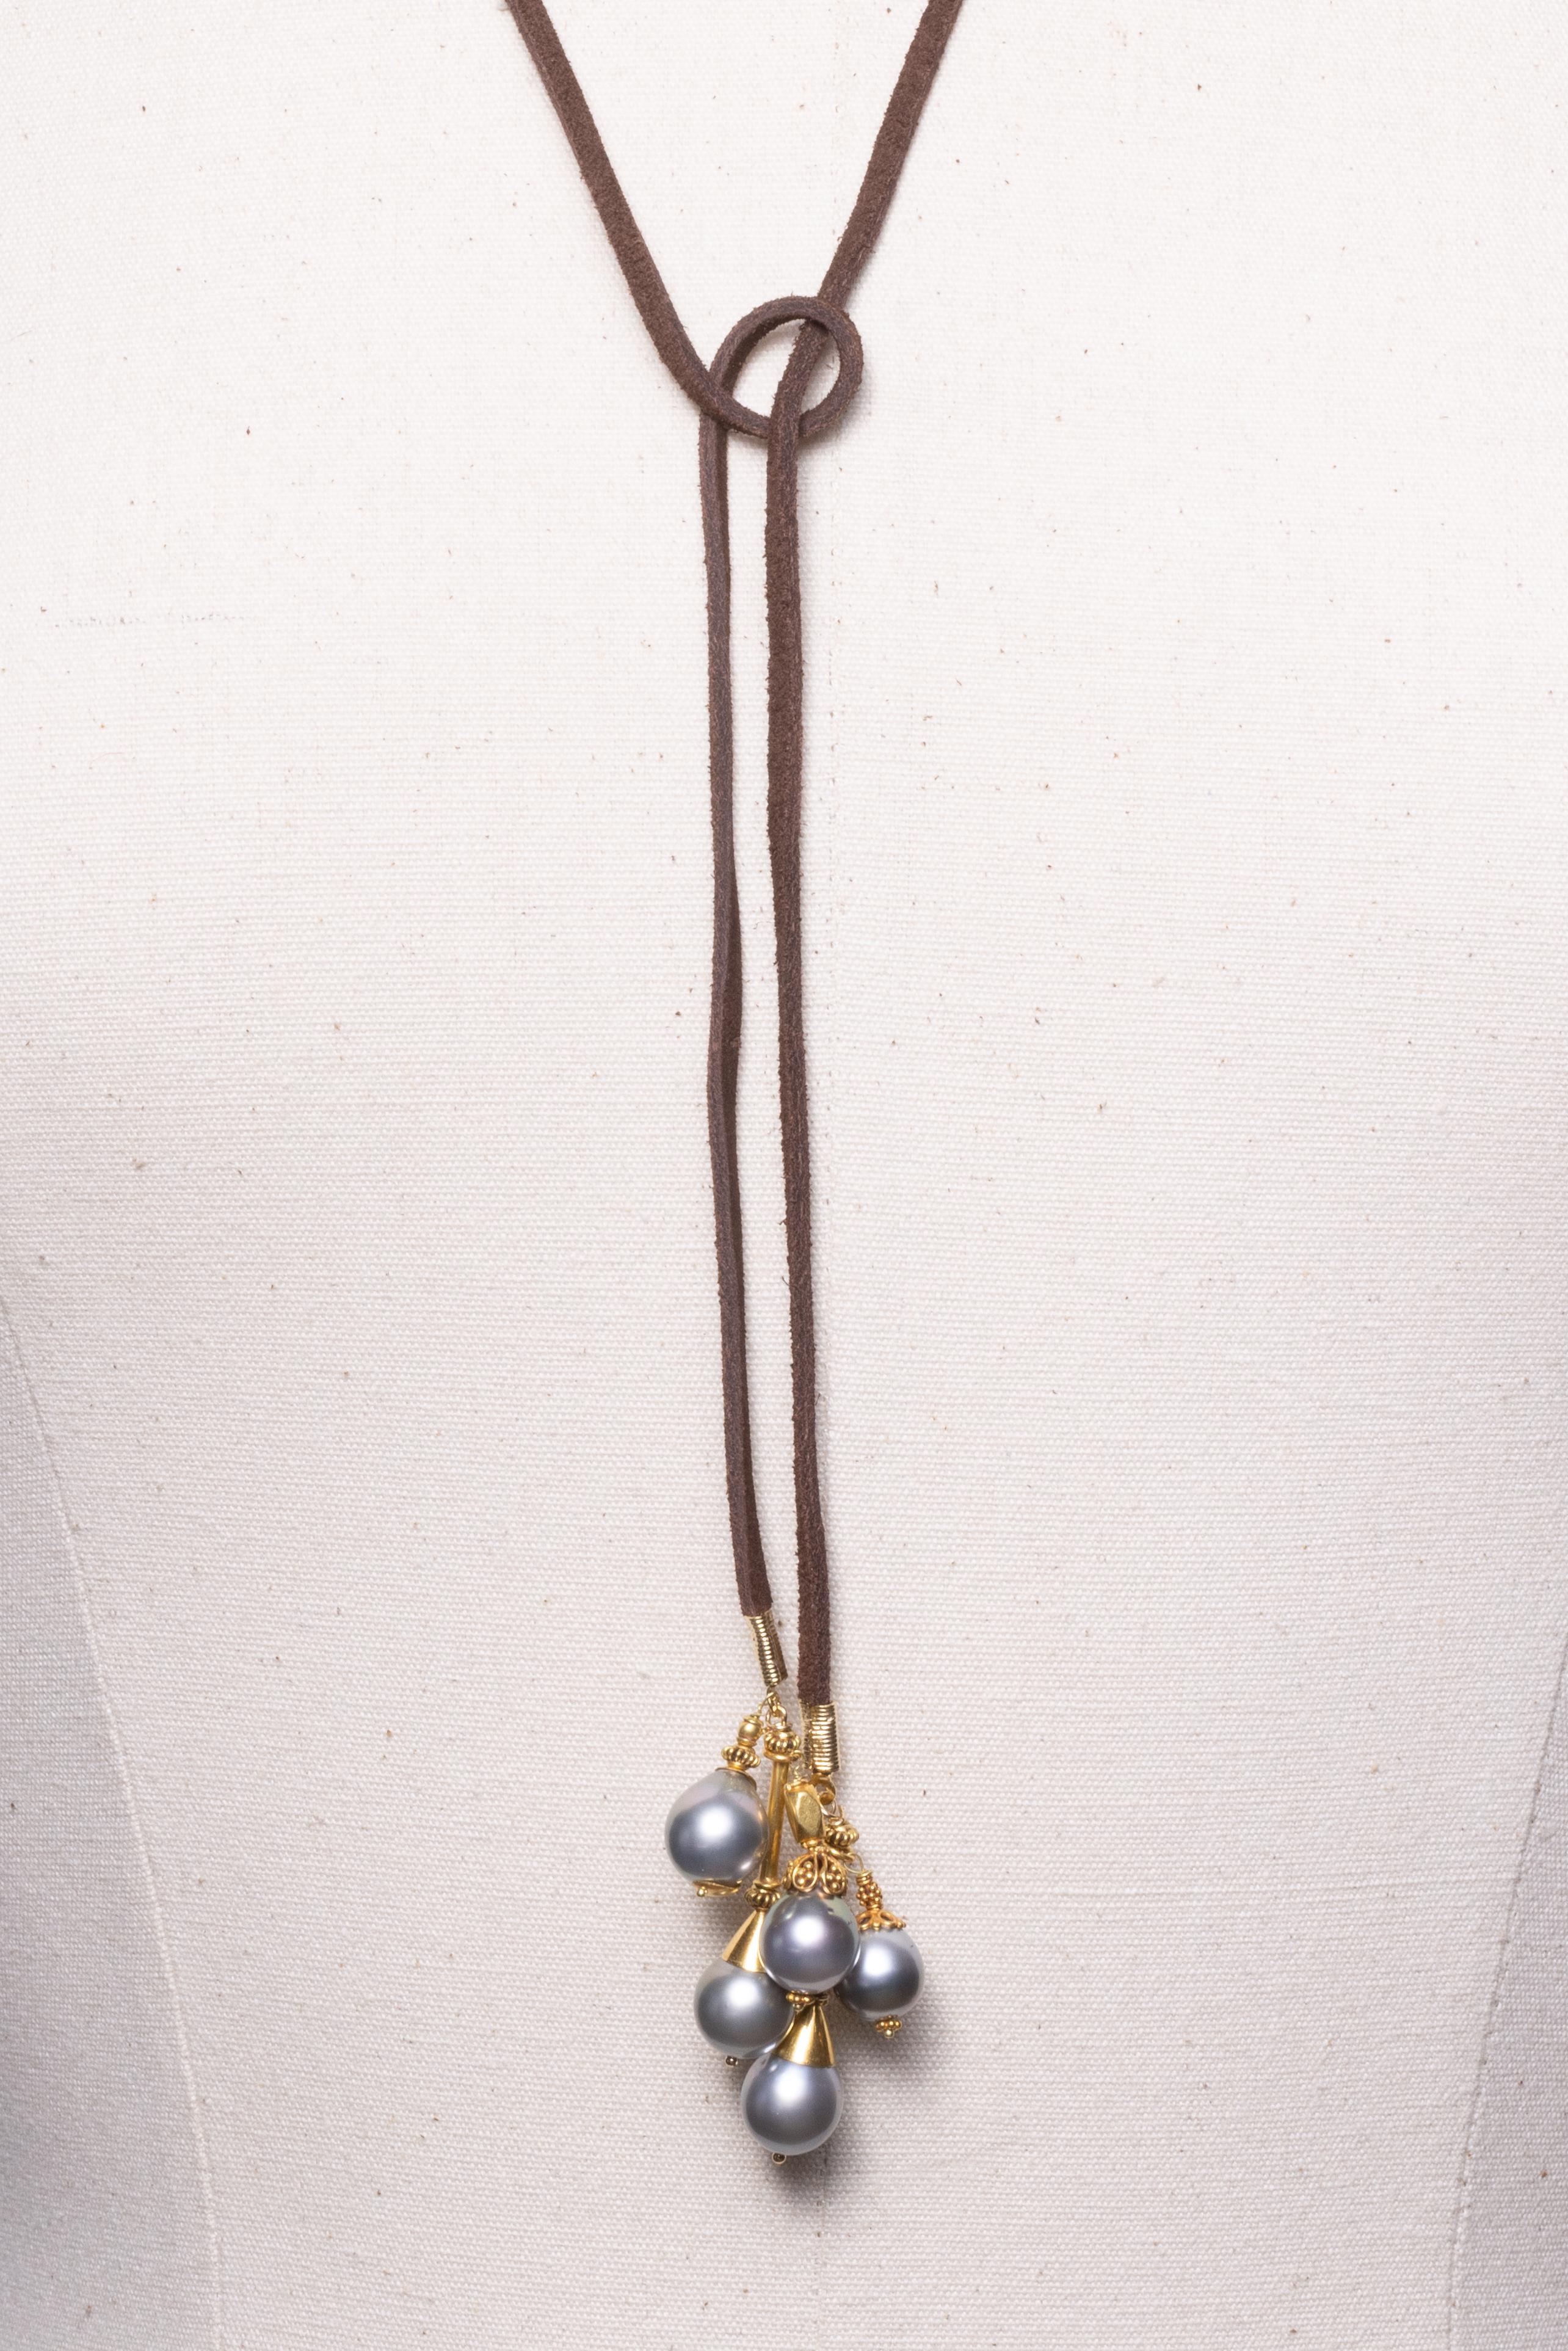 Women's or Men's Tahitian Pearl & 18K Gold Lariat Necklace on Suede, by Deborah Lockhart Phillips For Sale